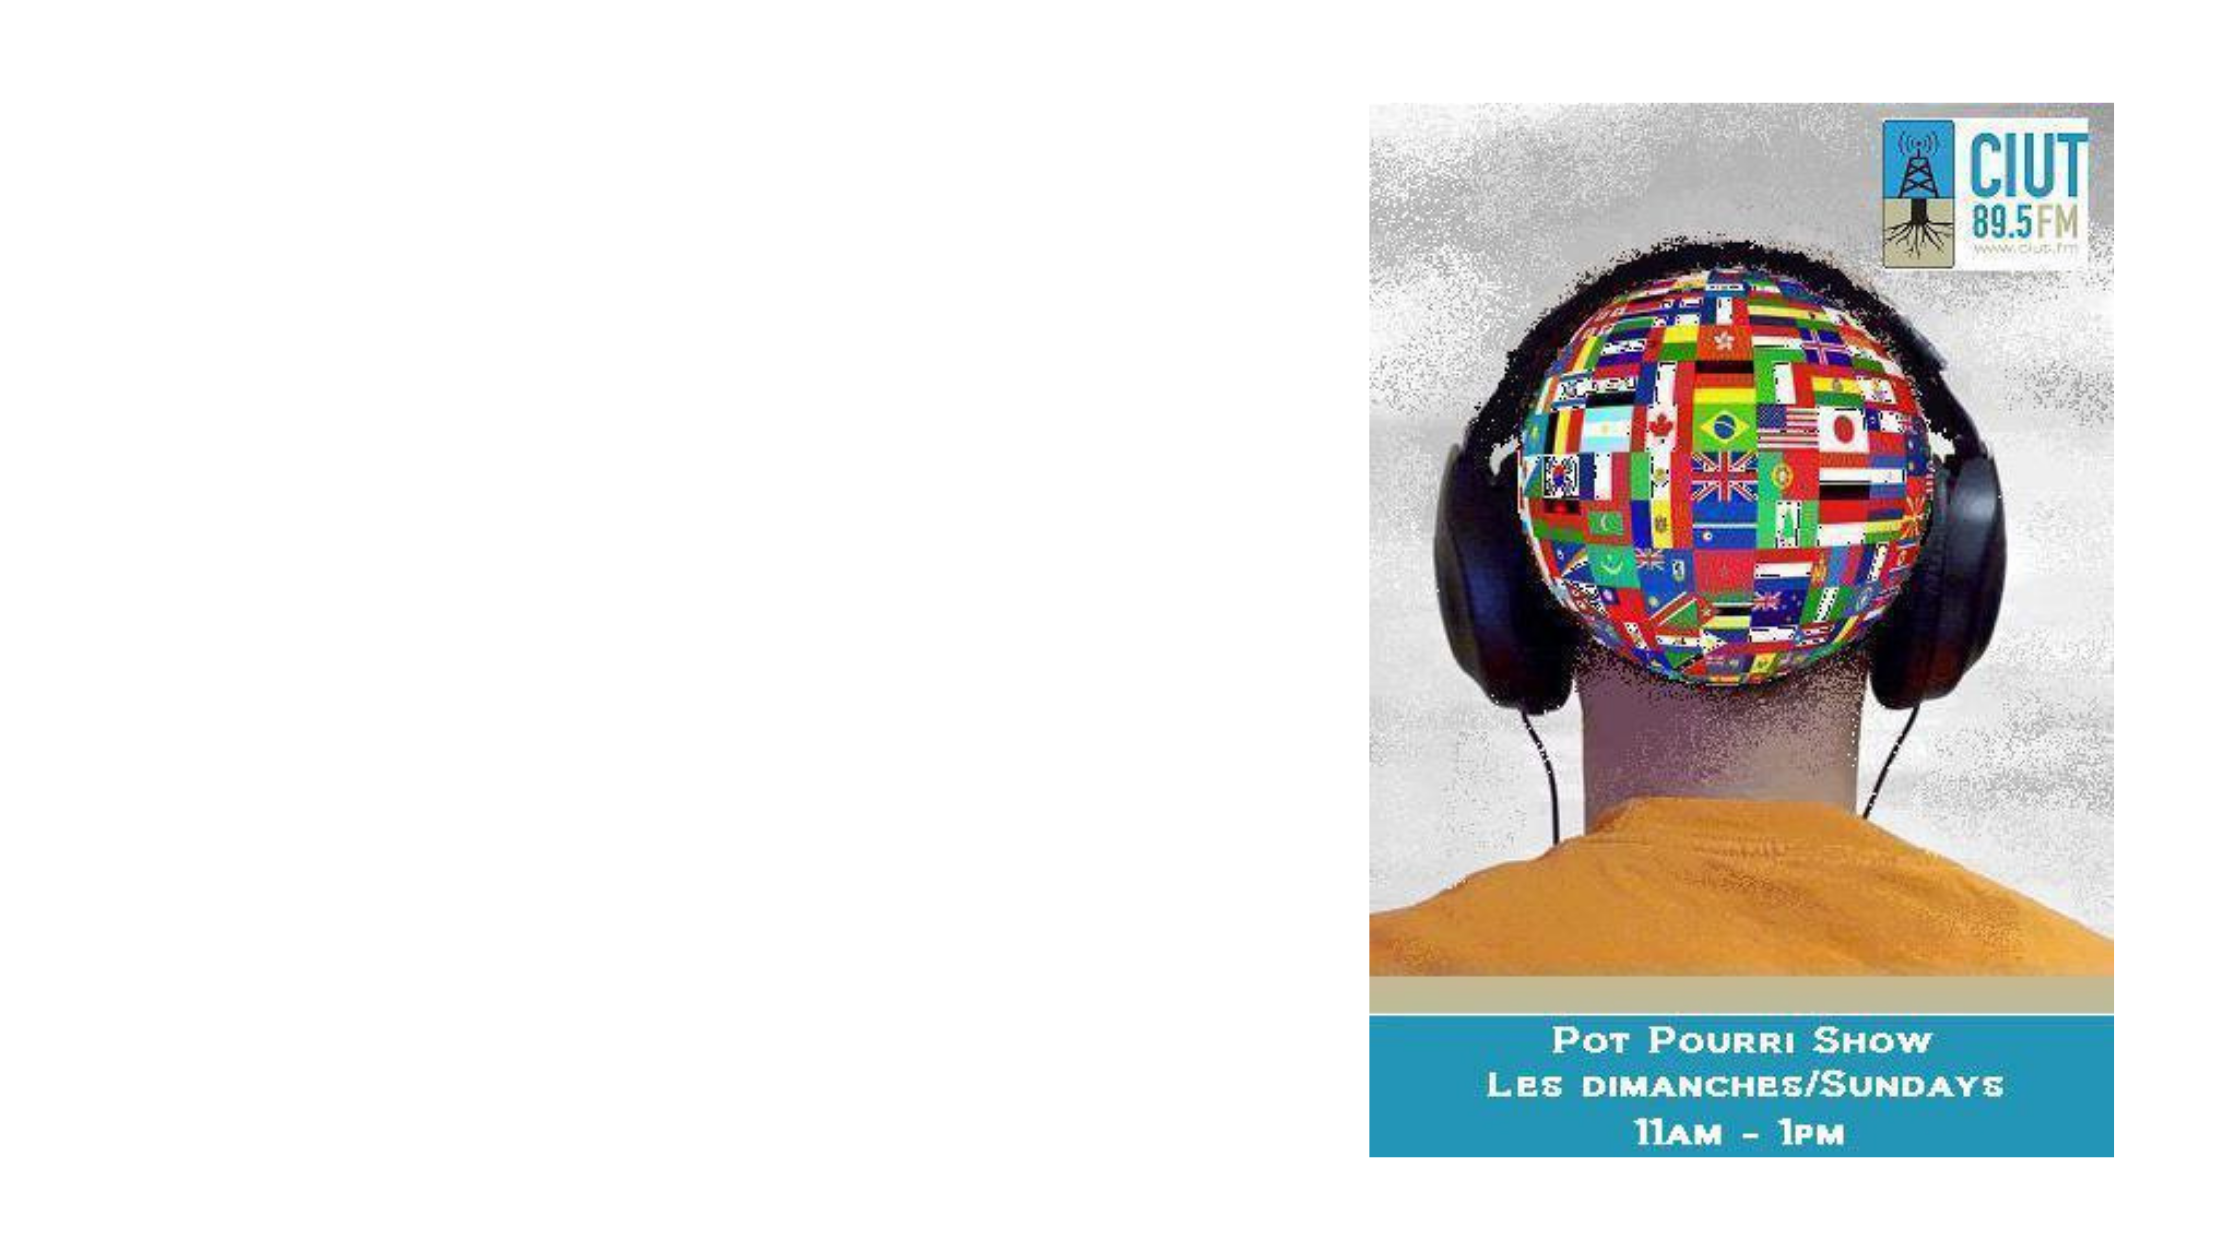 June 2022 Juin 2022 CIUT 89.5FM & Pot-Pourri Show celebrate Pride and National Indigenous History Month with a lineup of special programing showcasing artists, stories, perspectives and voices across the 2SLGBTQI+